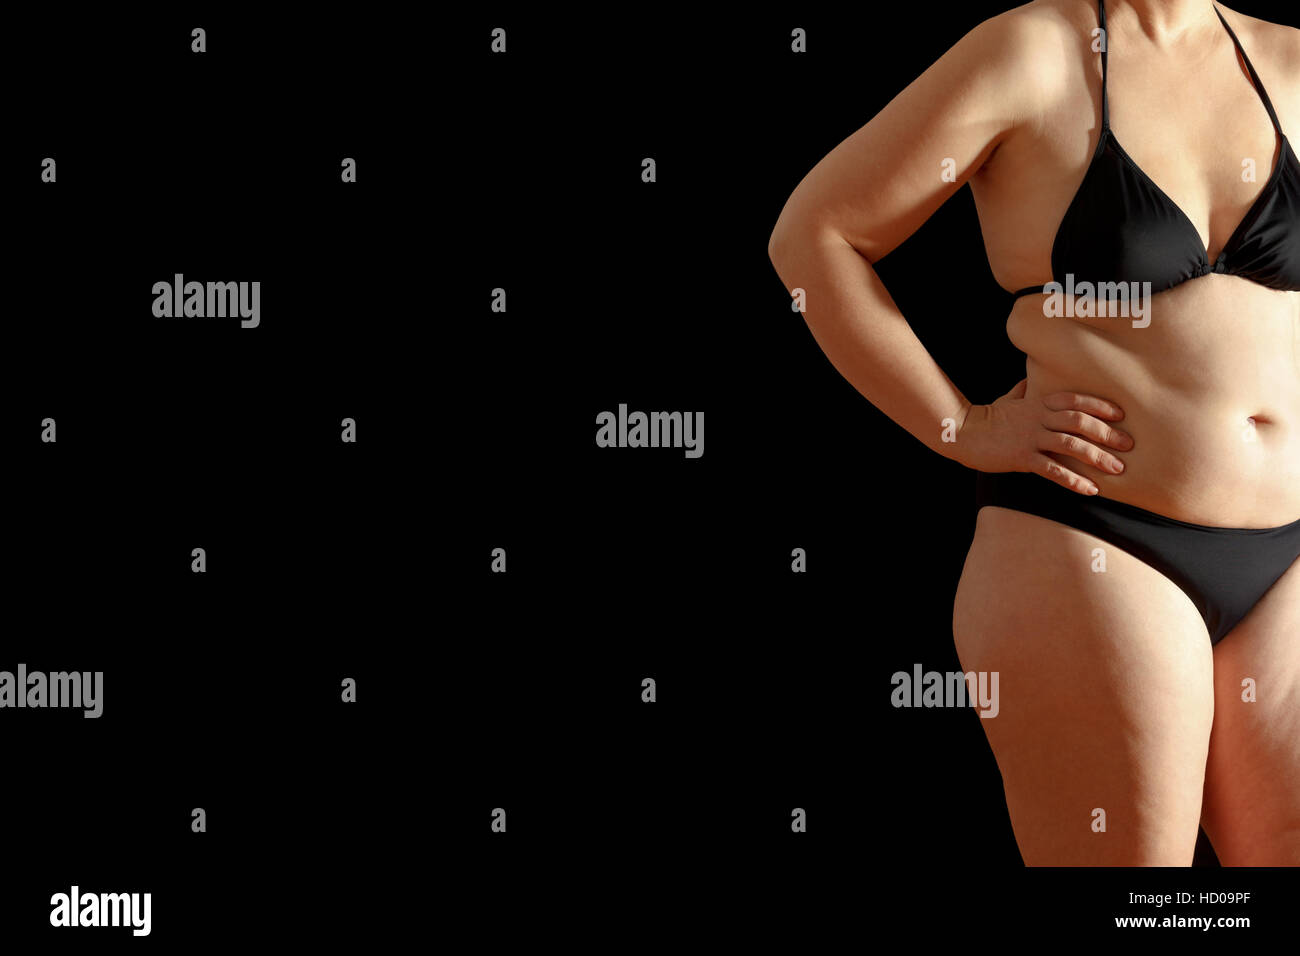 Womans body in bikini with excessive fat on waist and stomach, isolated, white background, text or copy space Stock Photo